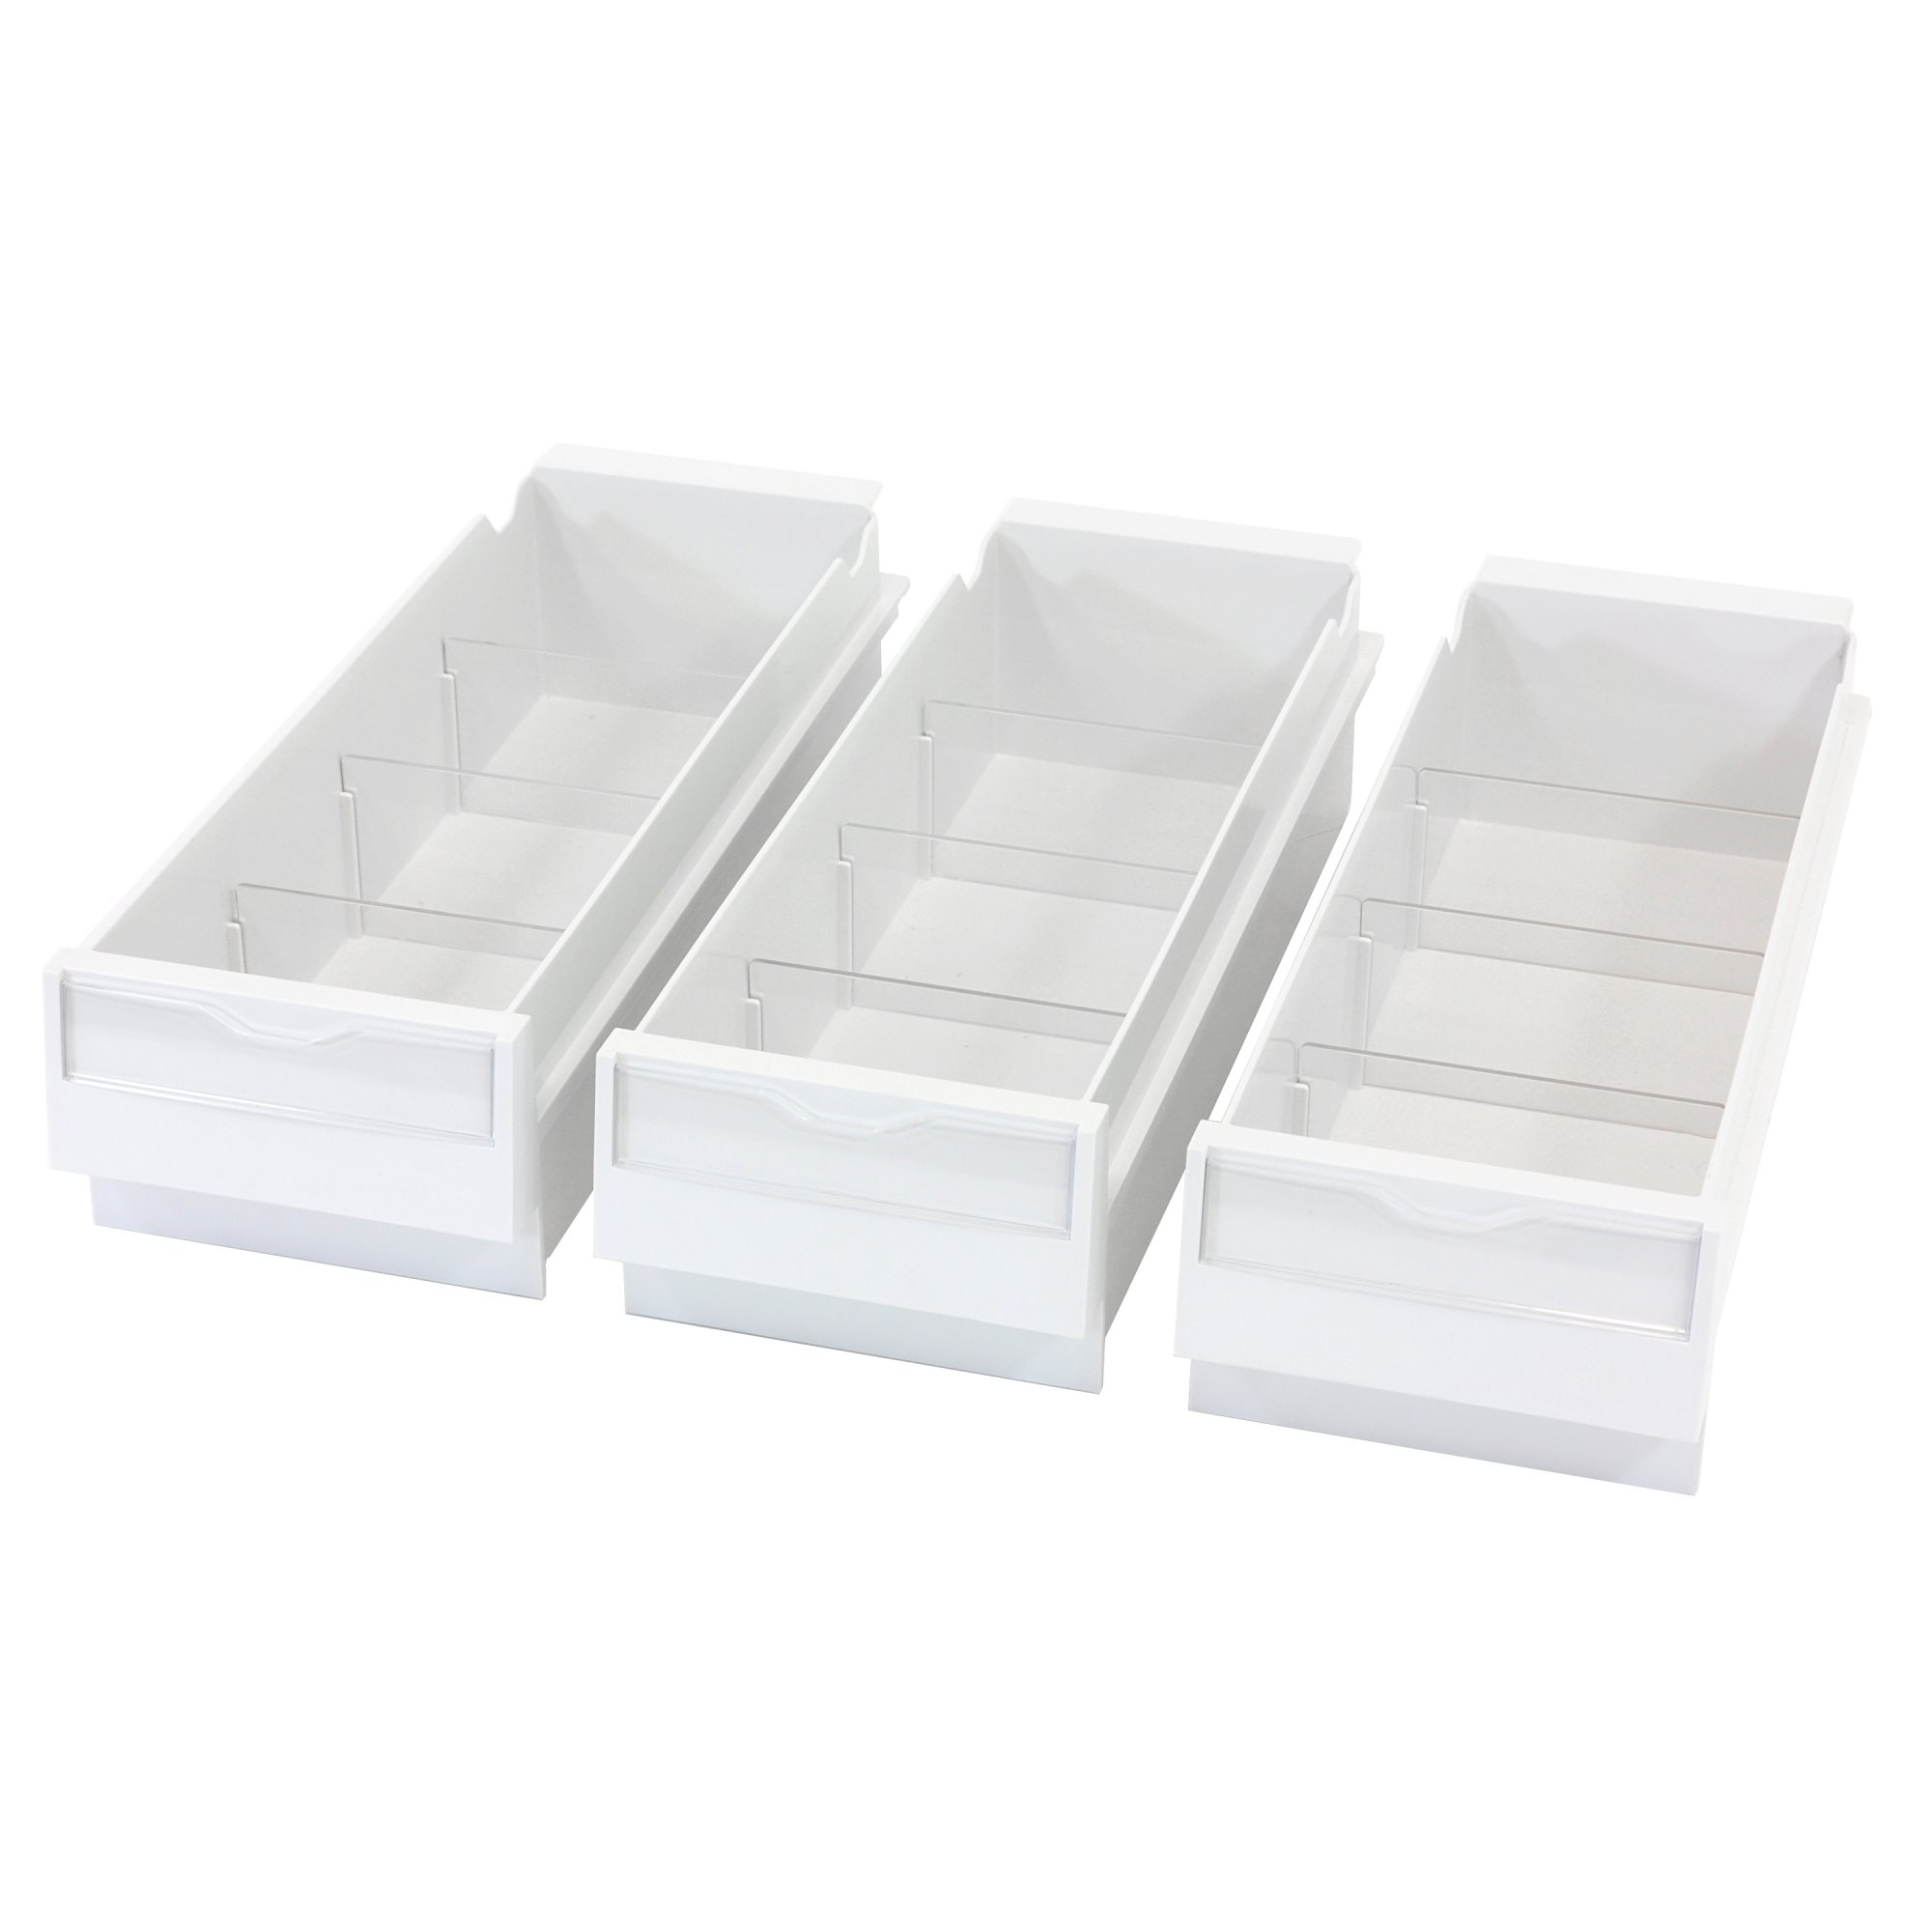 Ergotron 97-847 SV Replacement Drawer Kit (3 small drawers)